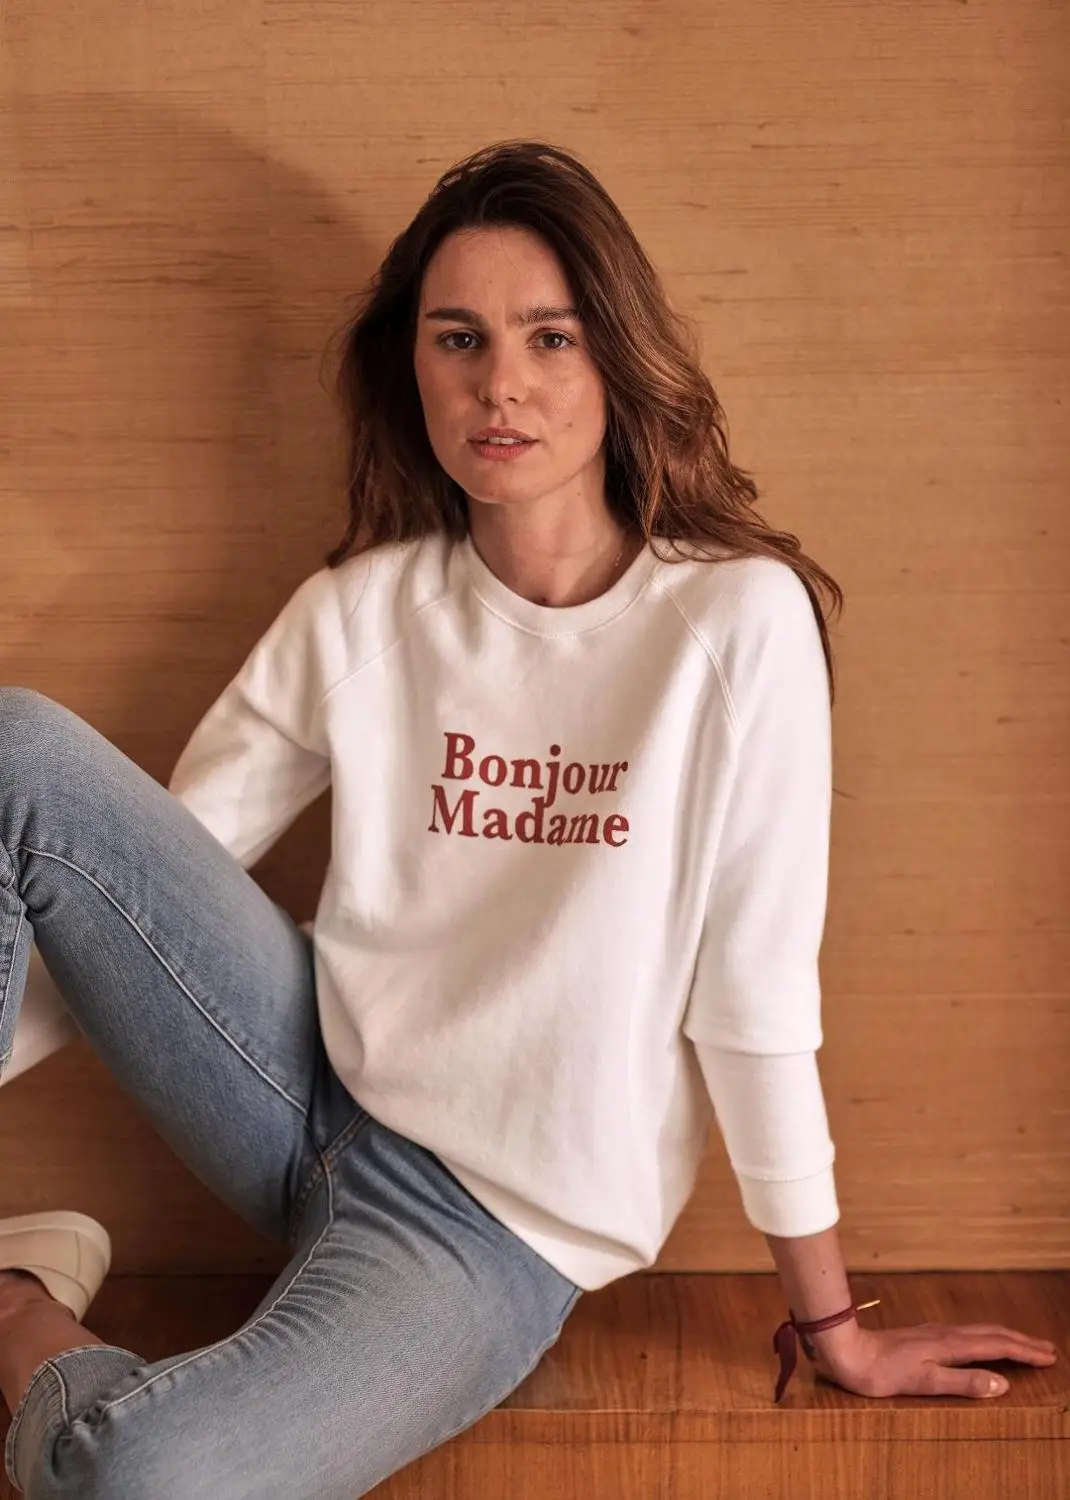 

Spring New Style Female Sweatshirt With French Bonjour Madame Letter Print Top For Lady Cotton White Crew Neck Tops